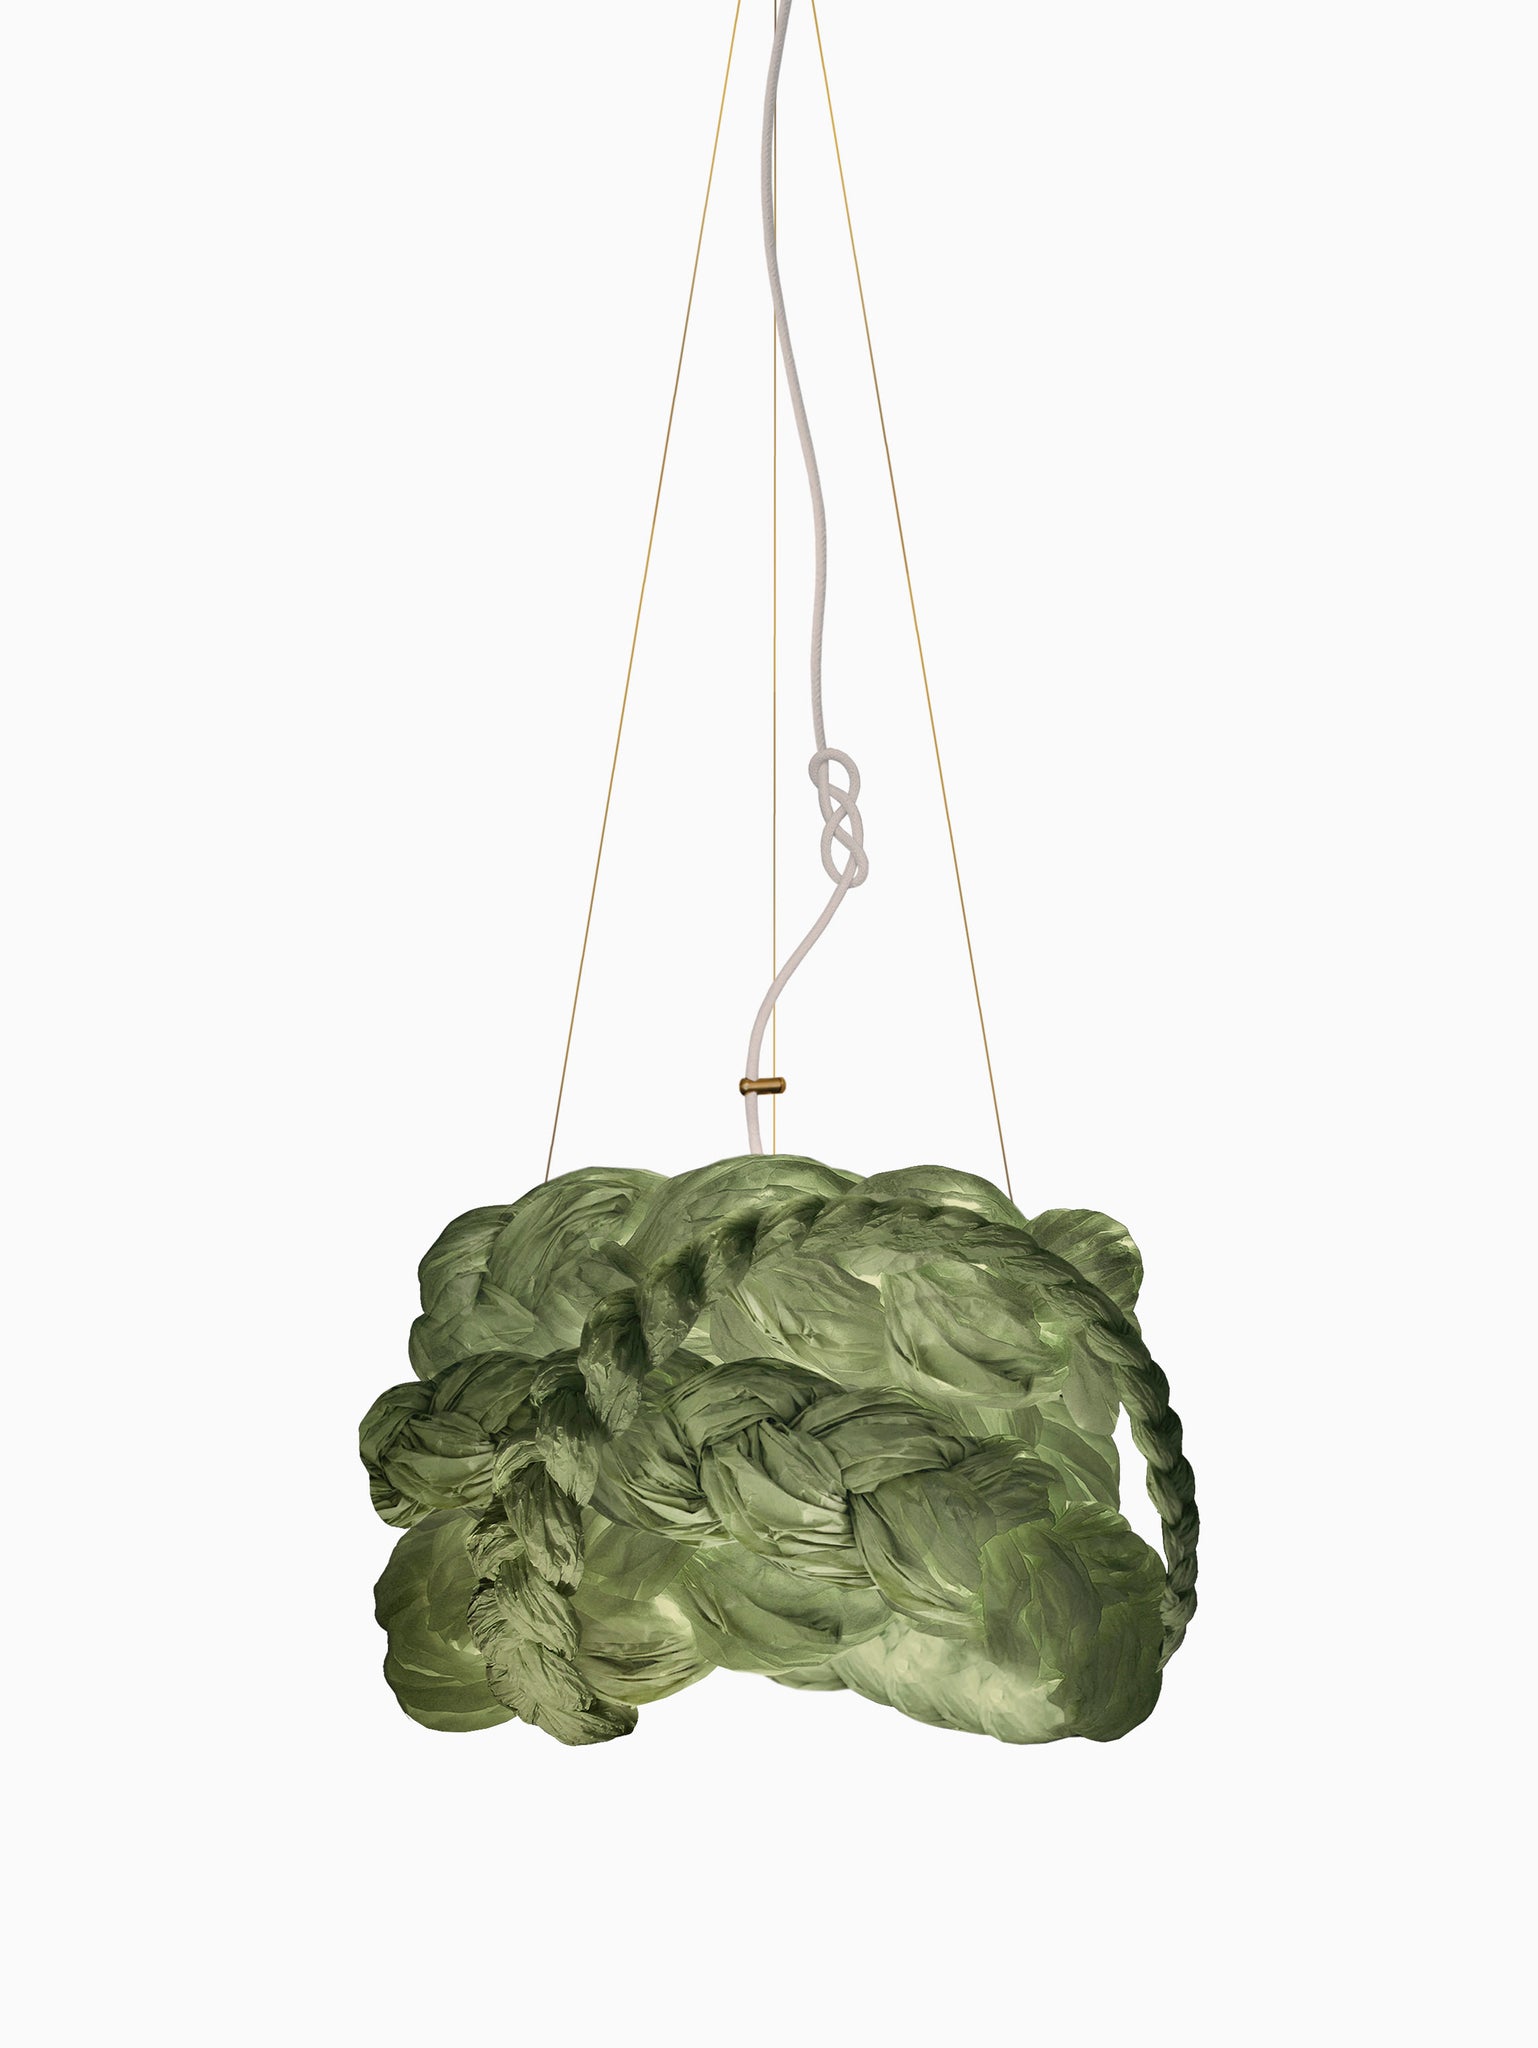 Mint Paper Braided Unique Handmade Pendant Lamp | Cozy Atmosphere Lighting | Contemporary Natural Lighting for Living room,  Bedroom & Lobby | Sustainable Design Lighting | mammalampa The Bride suspension lamp S